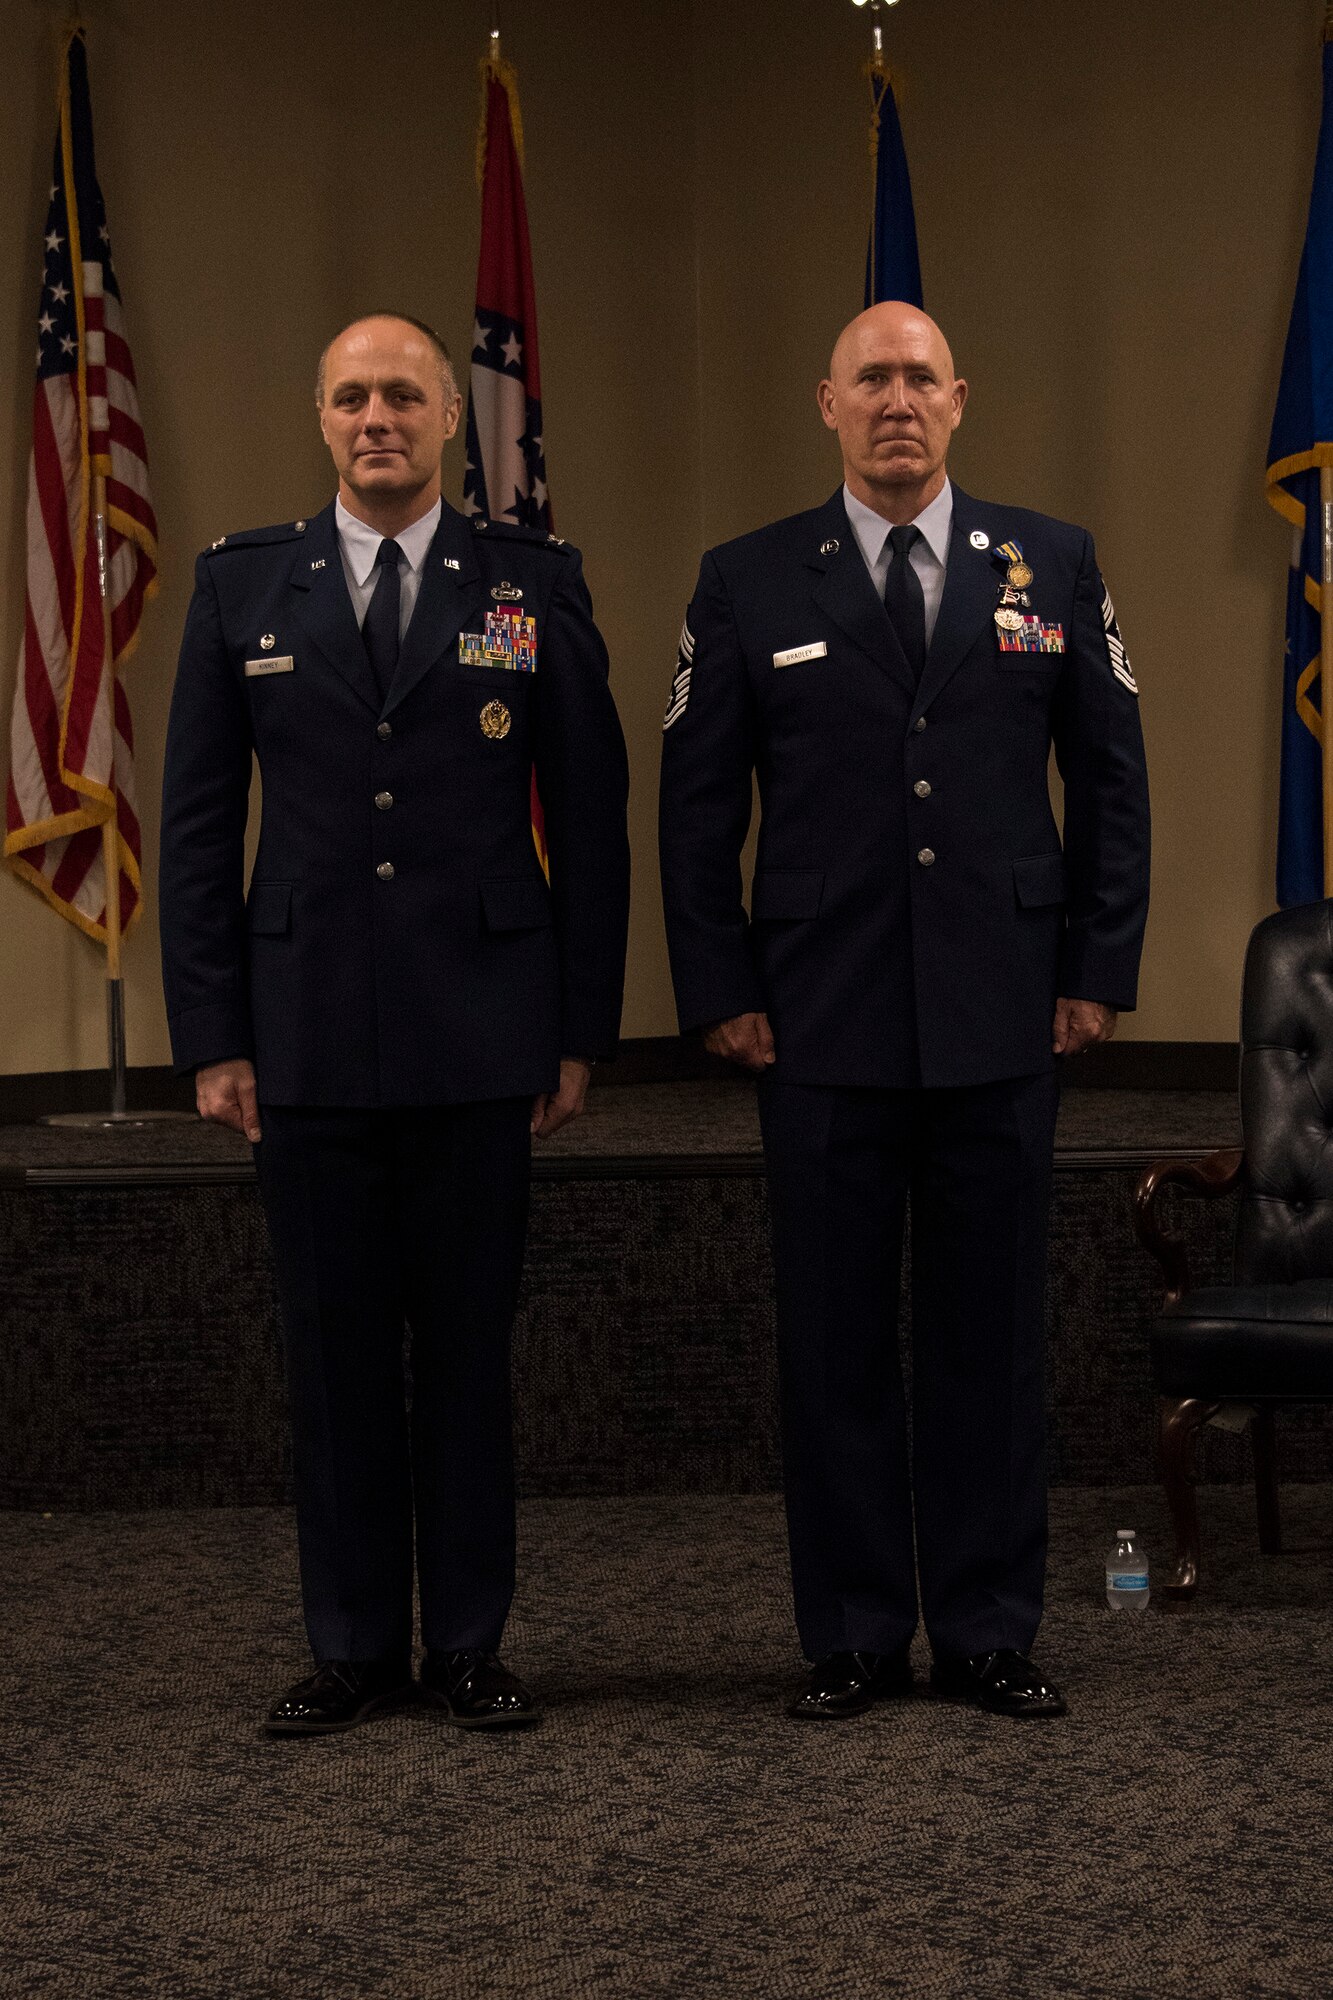 188th Wing Commander, Col. Robert I. Kinney, publishes a retirement order for Chief Master Sgt. Stephen R. Bradley, 188th Wing command chief master sergeant, during a retirement ceremony held May 4, 2019, at Ebbing Air National Guard Base, Arkansas. Bradley served 37 years as a dental technician, first sergeant, and eventually 188th Wing command chief. (U.S. Air National Guard photo by Tech. Sgt. John E. Hillier)